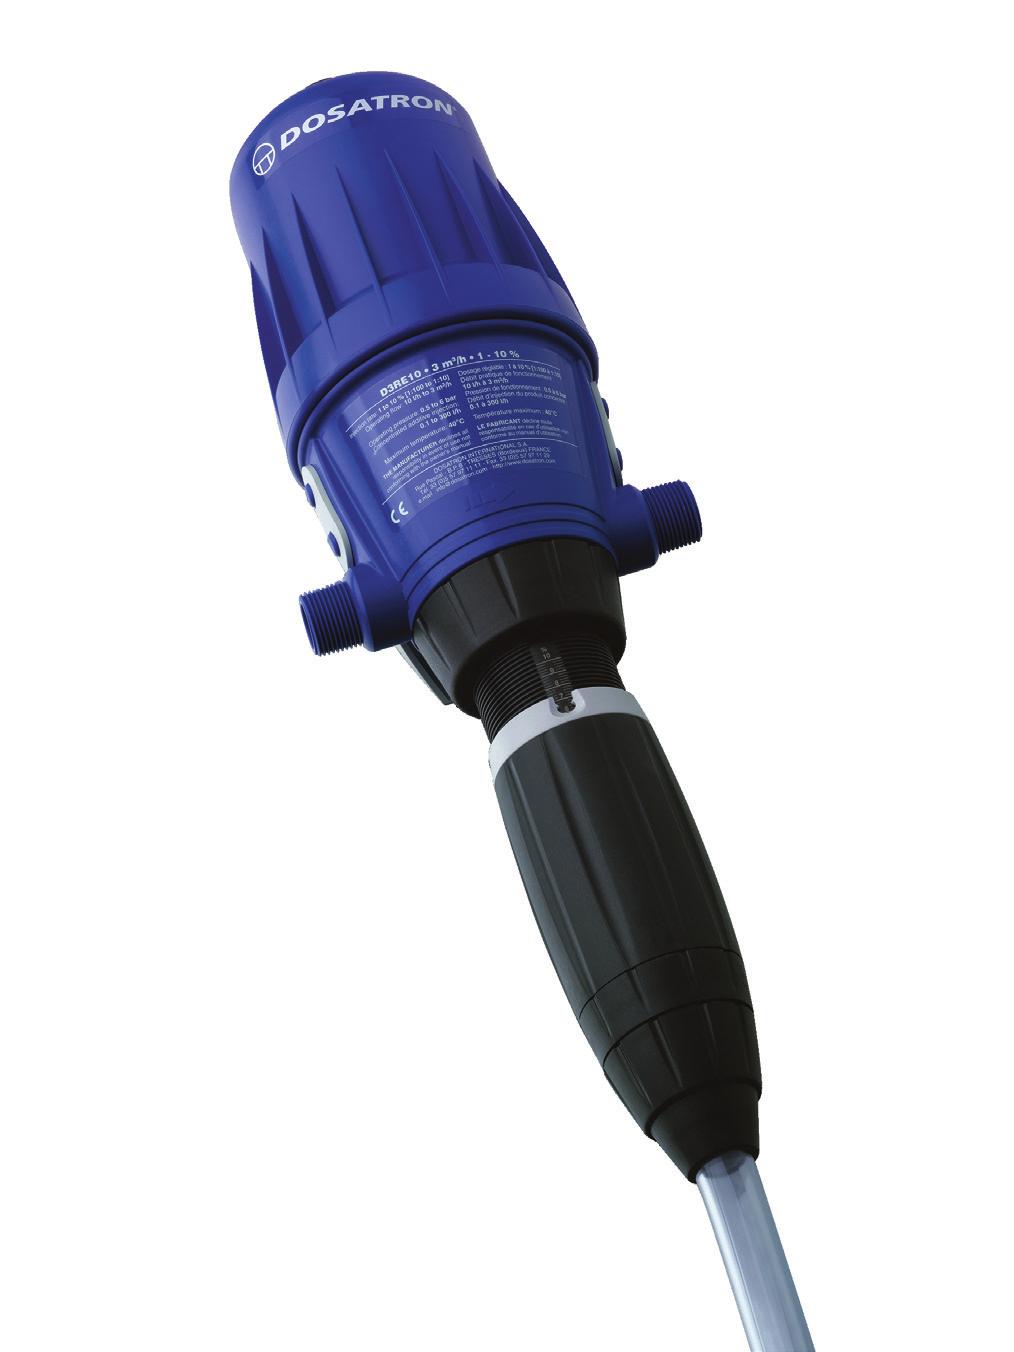 FLUID MIXING & DISTRIBUTION Dosatron D3RE10 Water-powered proportional dosing pump Simple to operate Not effected by water pressure and flow variations Ensures a correct and uniform blending of metal